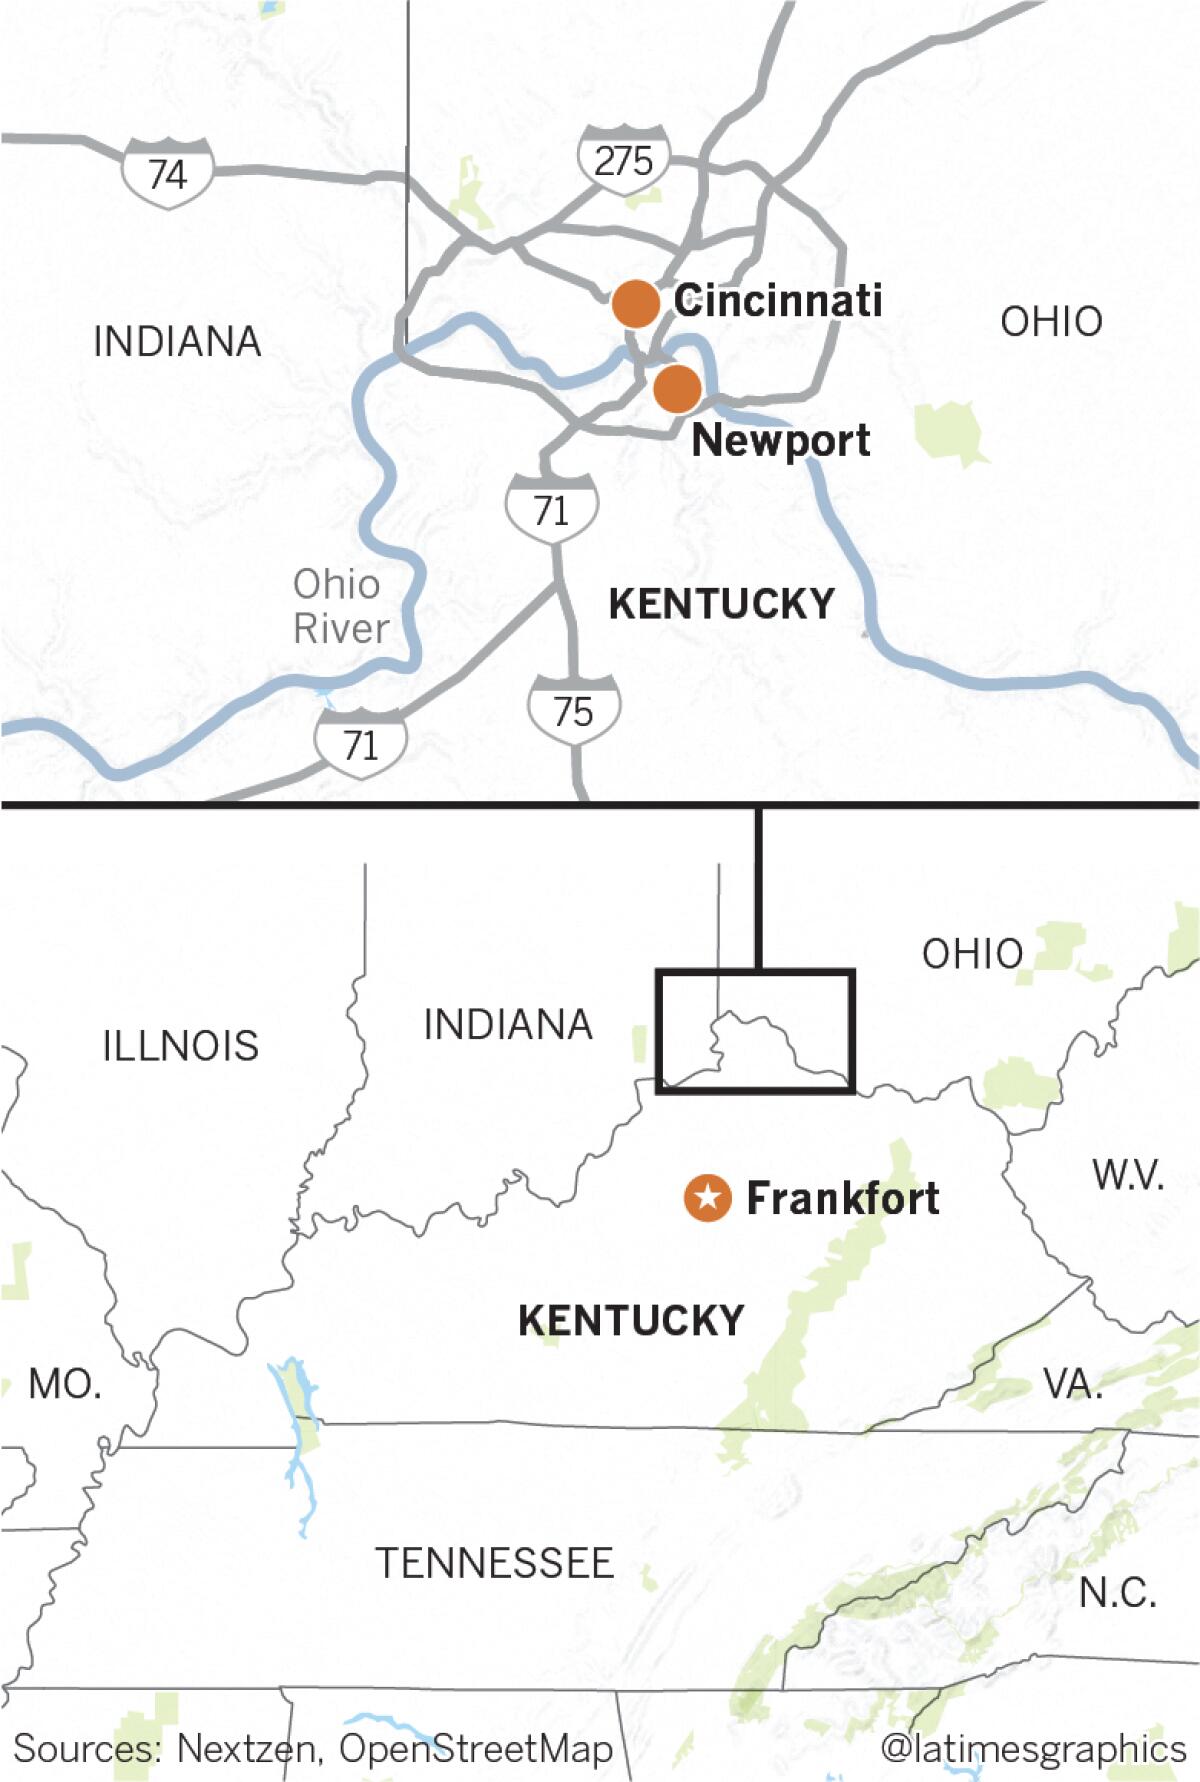 Map of Kentucky, showing the the town of Newport, capital city Frankfort, city of Cincinnati, Ohio, and the Ohio River. 